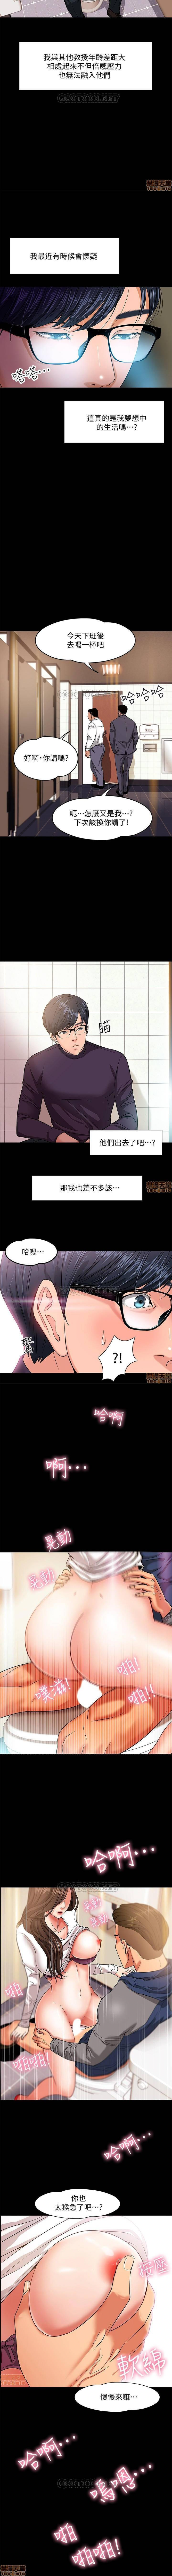 PROFESSOR, ARE YOU JUST GOING TO LOOK AT ME? | DESIRE SWAMP | 教授，你還等什麼? Ch. 1Manhwa 3